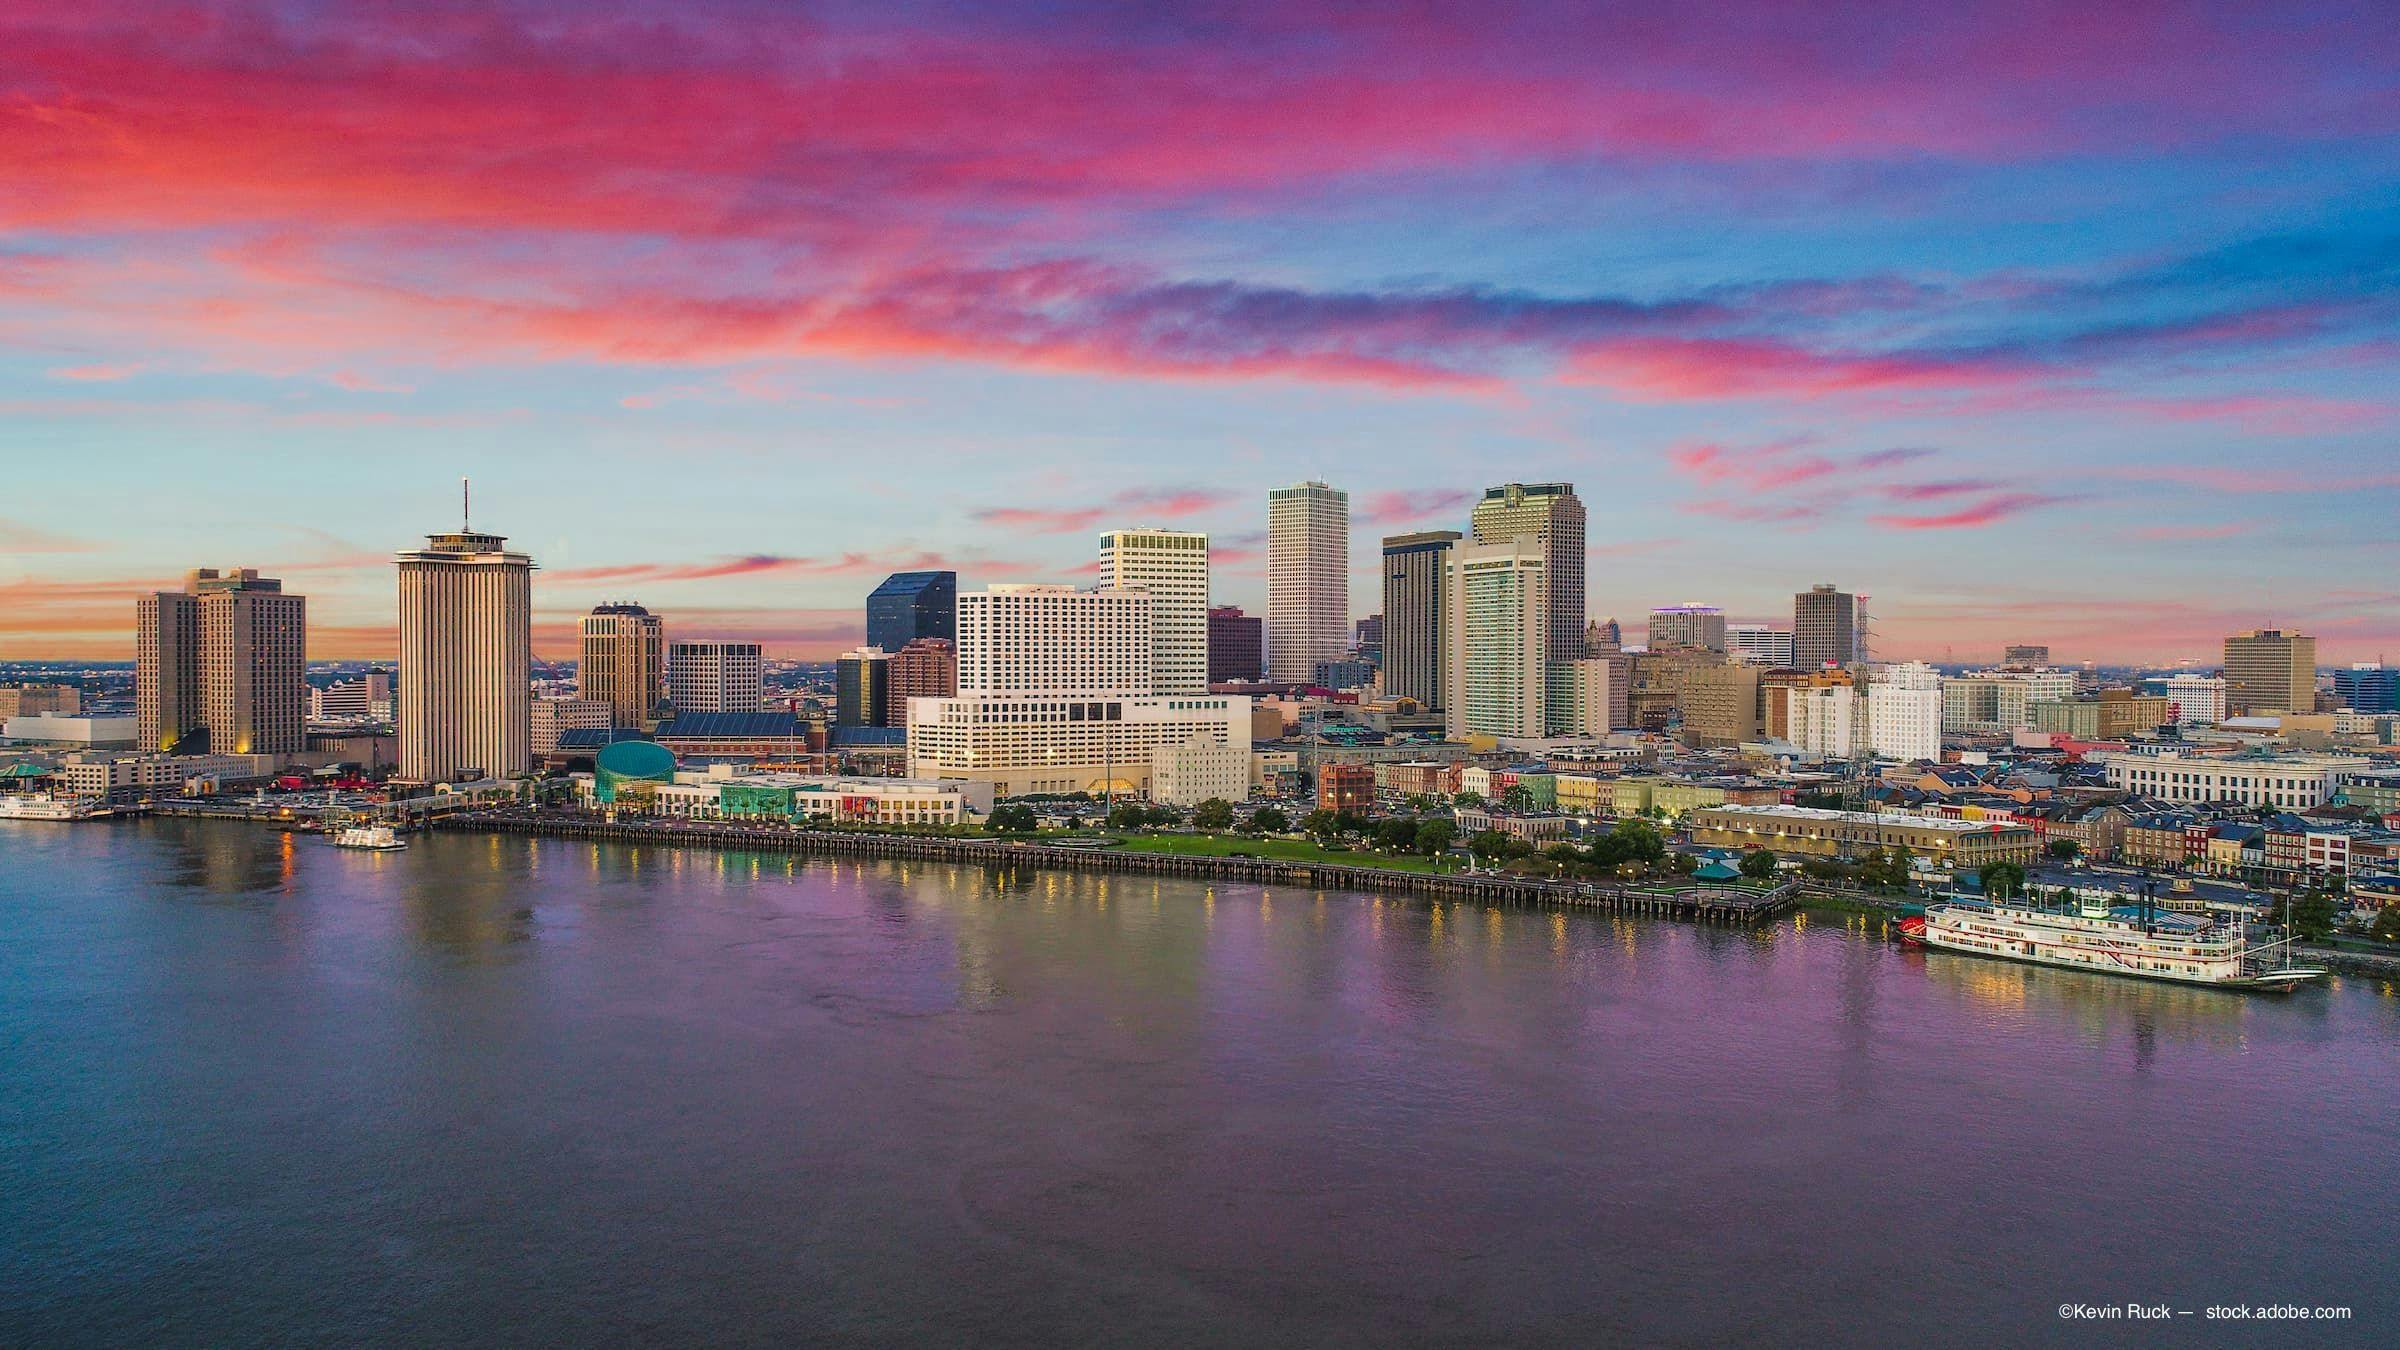 The Association for Research in Vision and Ophthalmology (ARVO) 2023 annual meeting is convening in New Orleans from April 23 to 27 at the Ernest N. Morial Convention Center. (Image Credit: Adobe Stock/Kevin Rusk)